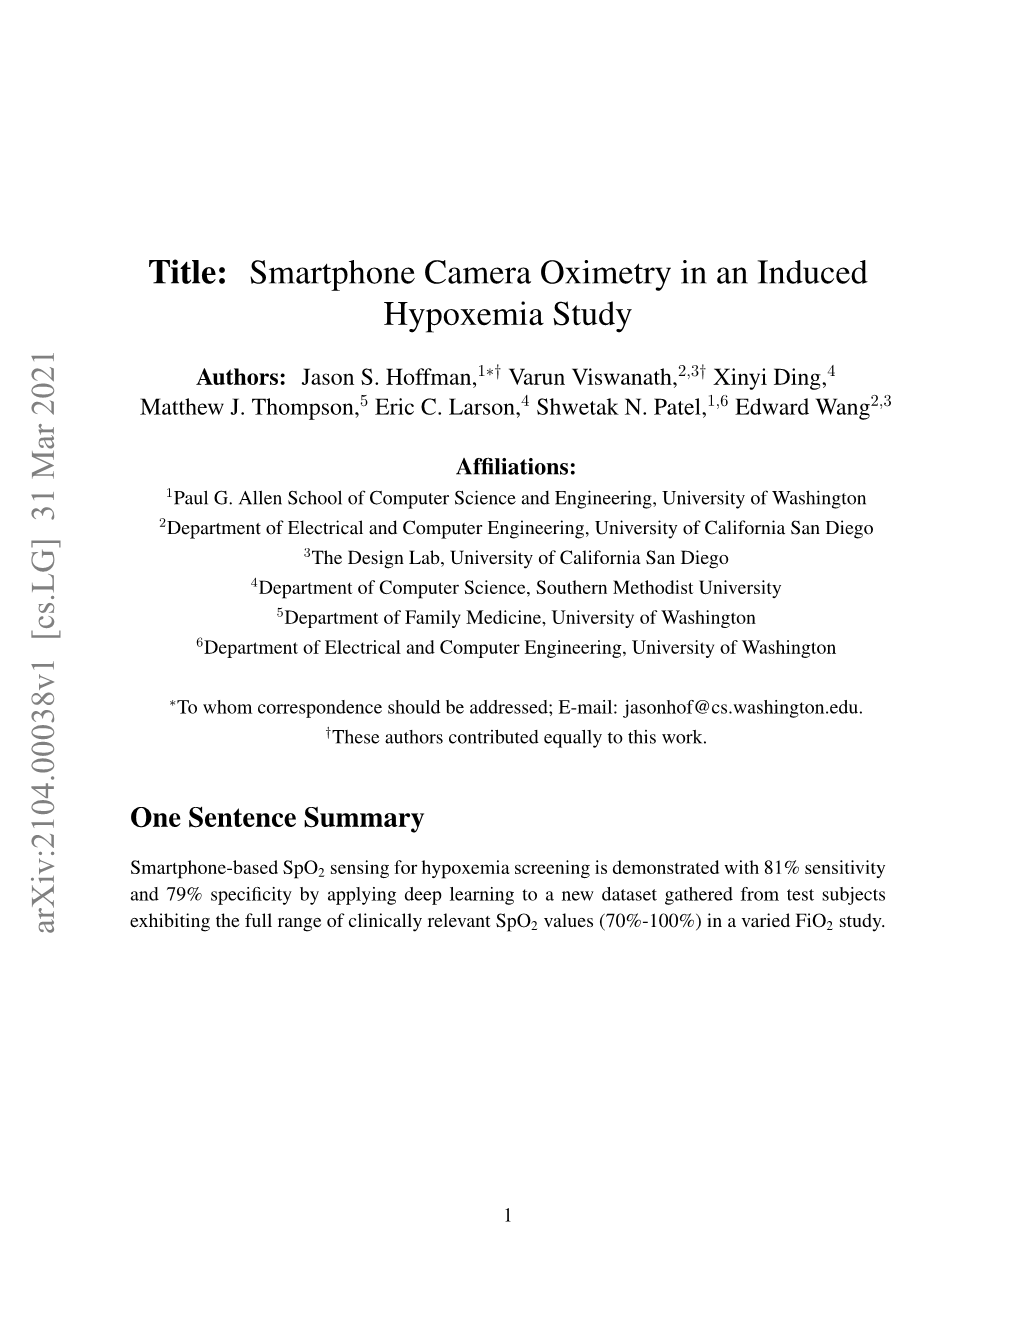 Smartphone Camera Oximetry in an Induced Hypoxemia Study